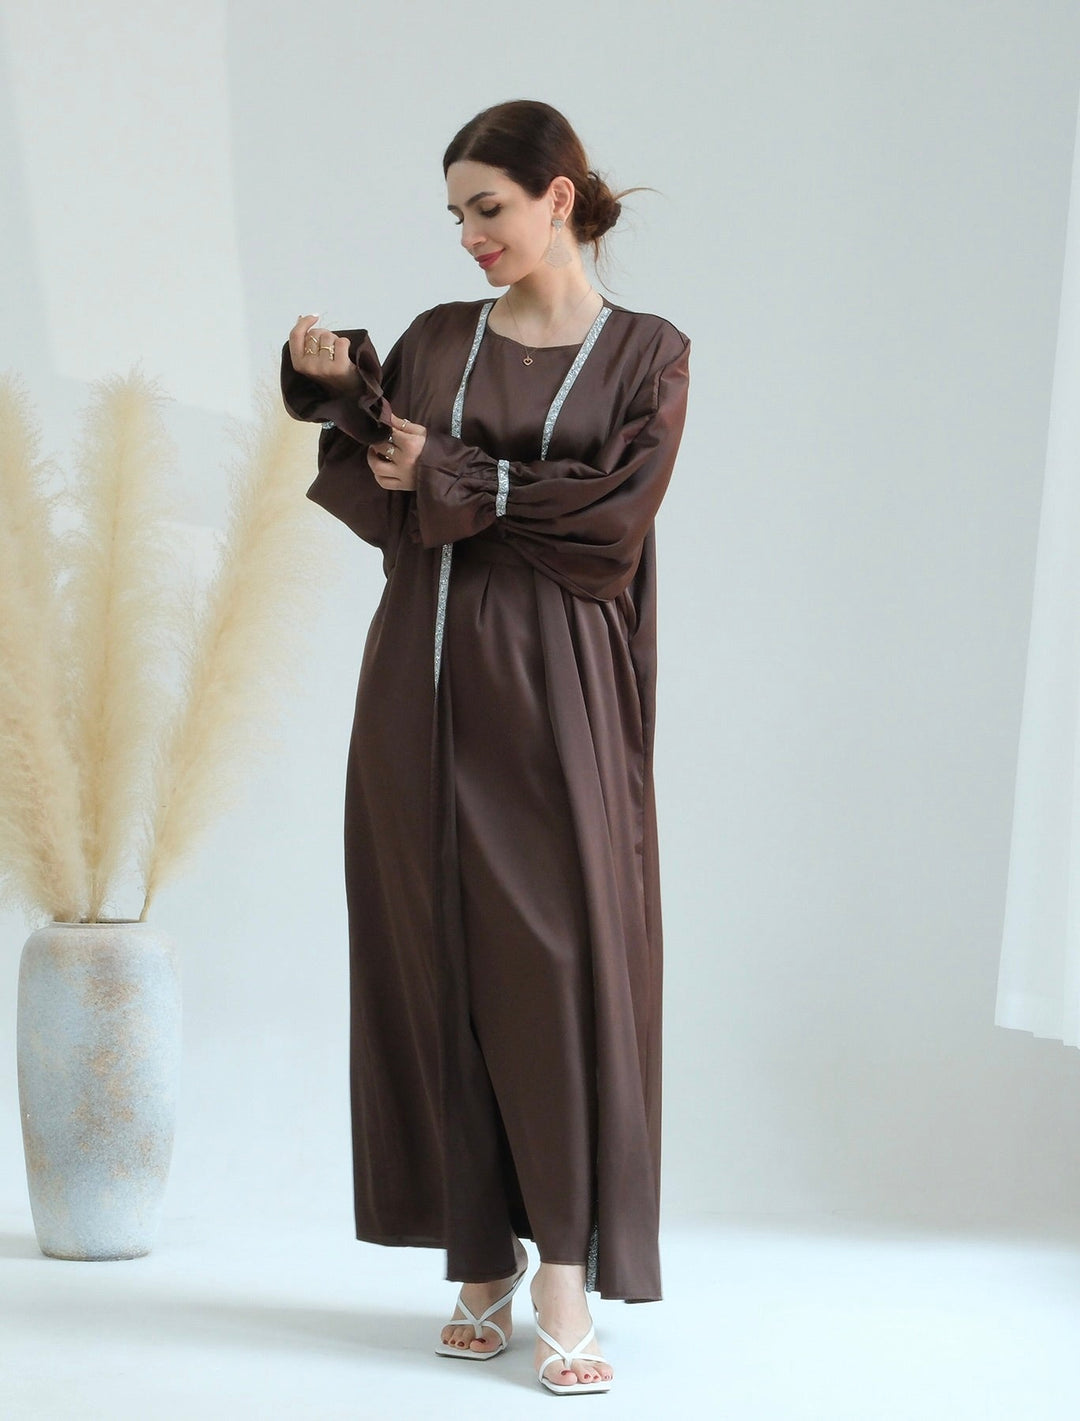 Get trendy with Aria2 Matching 3-piece Set - Chocolate - Dresses available at Voilee NY. Grab yours for $110 today!